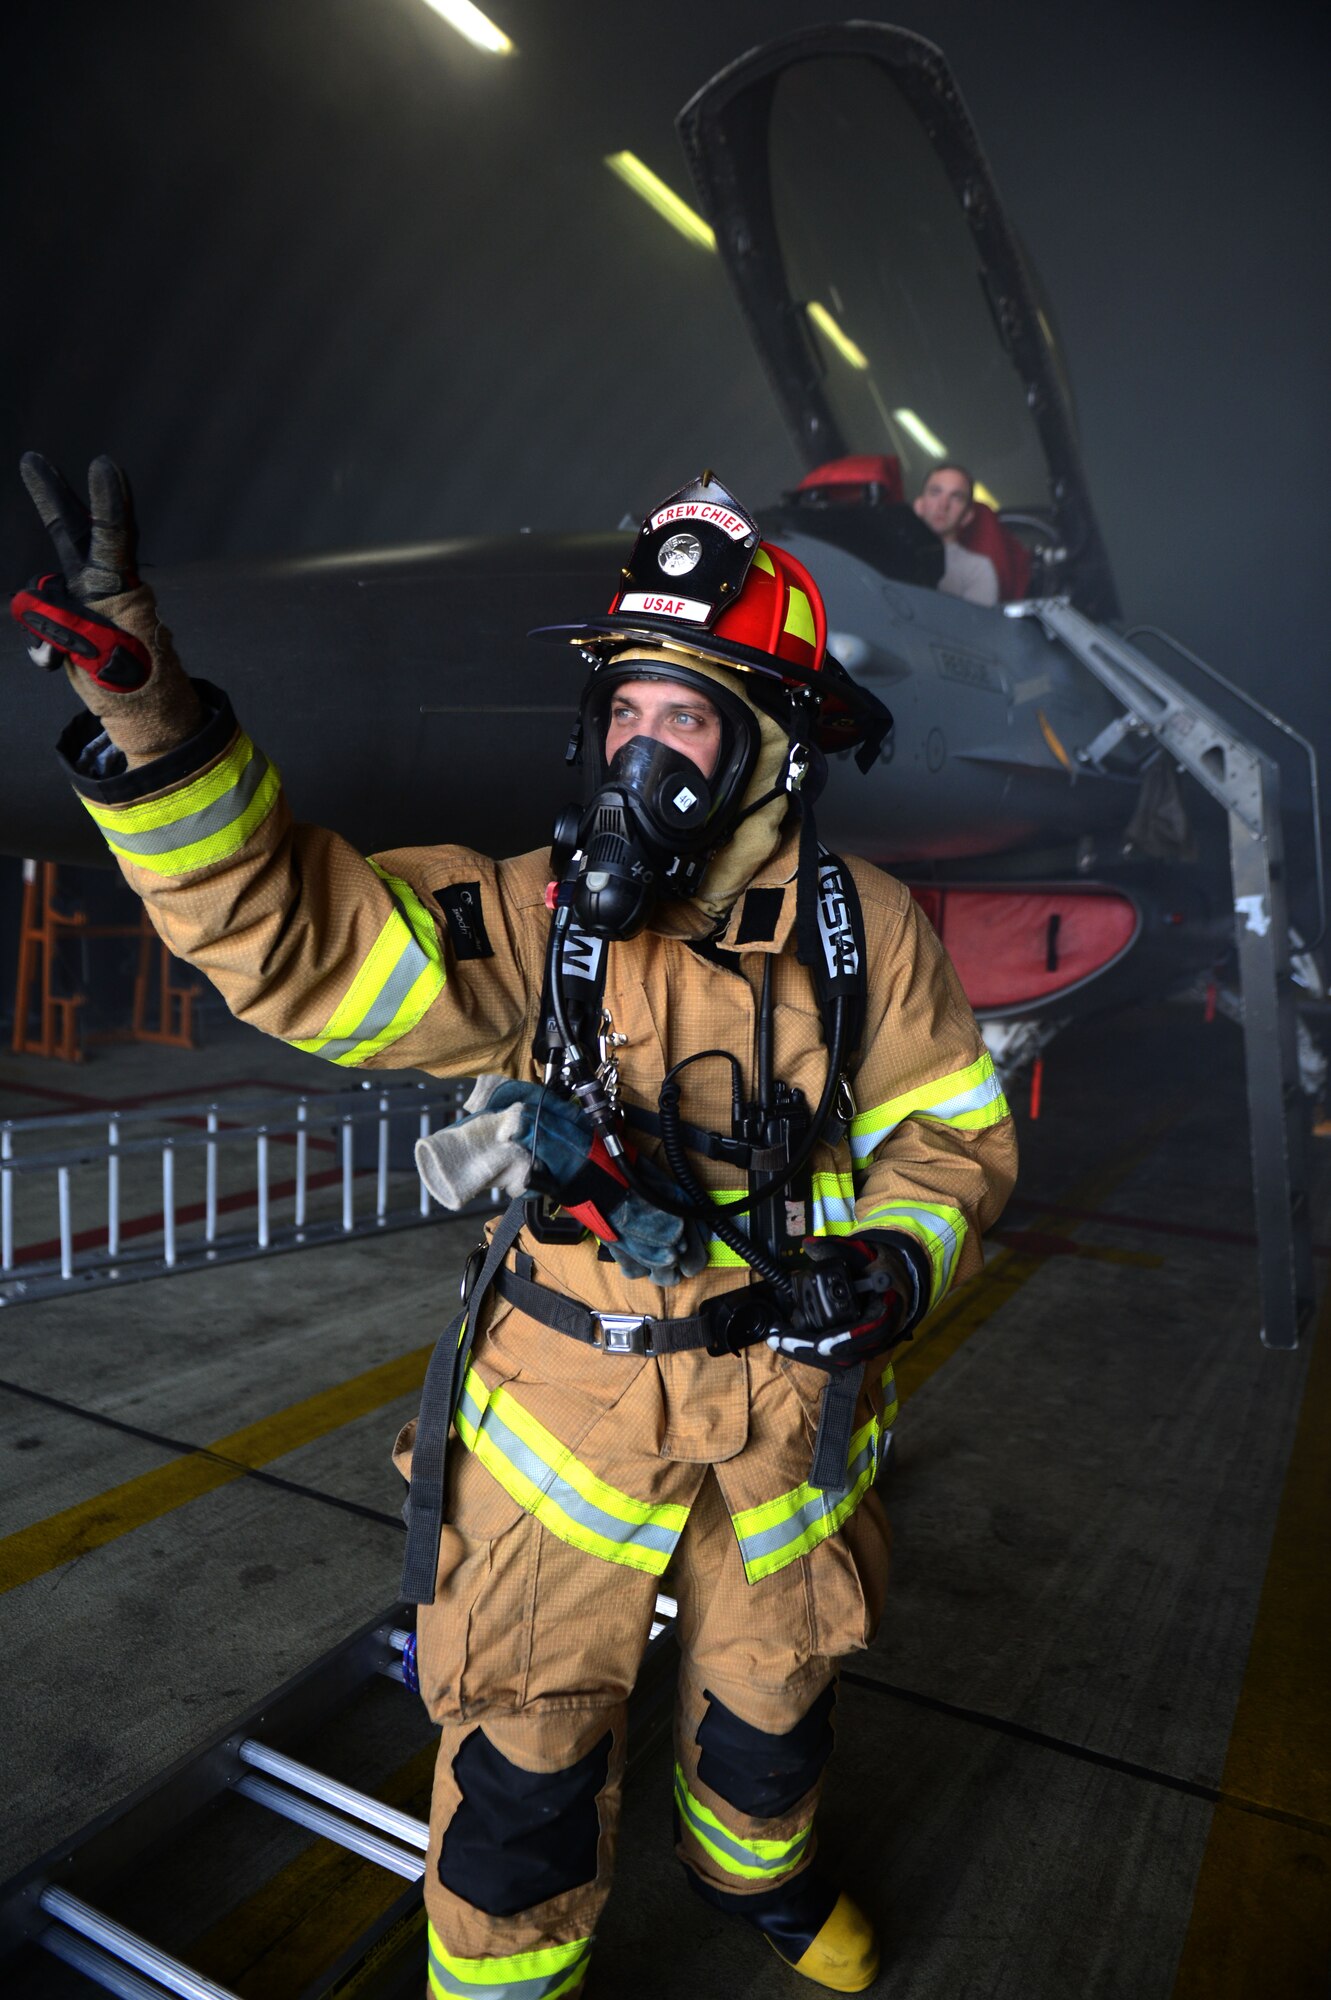 SPANGDAHLEM AIR BASE, Germany – U.S. Air Force Tech. Sgt. Michael Tellish, 52nd Civil Engineer Squadron crew chief from Pittsburg, communicates to his fellow firefighters with hand gestures during an aircraft fire training exercise Aug. 14, 2013. Communicating with an oxygen mask is difficult, but fire protection Airmen use any means necessary to relay a message during an incident such as this. (U.S. Air Force photo by Airman 1st Class Gustavo Castillo/Released)